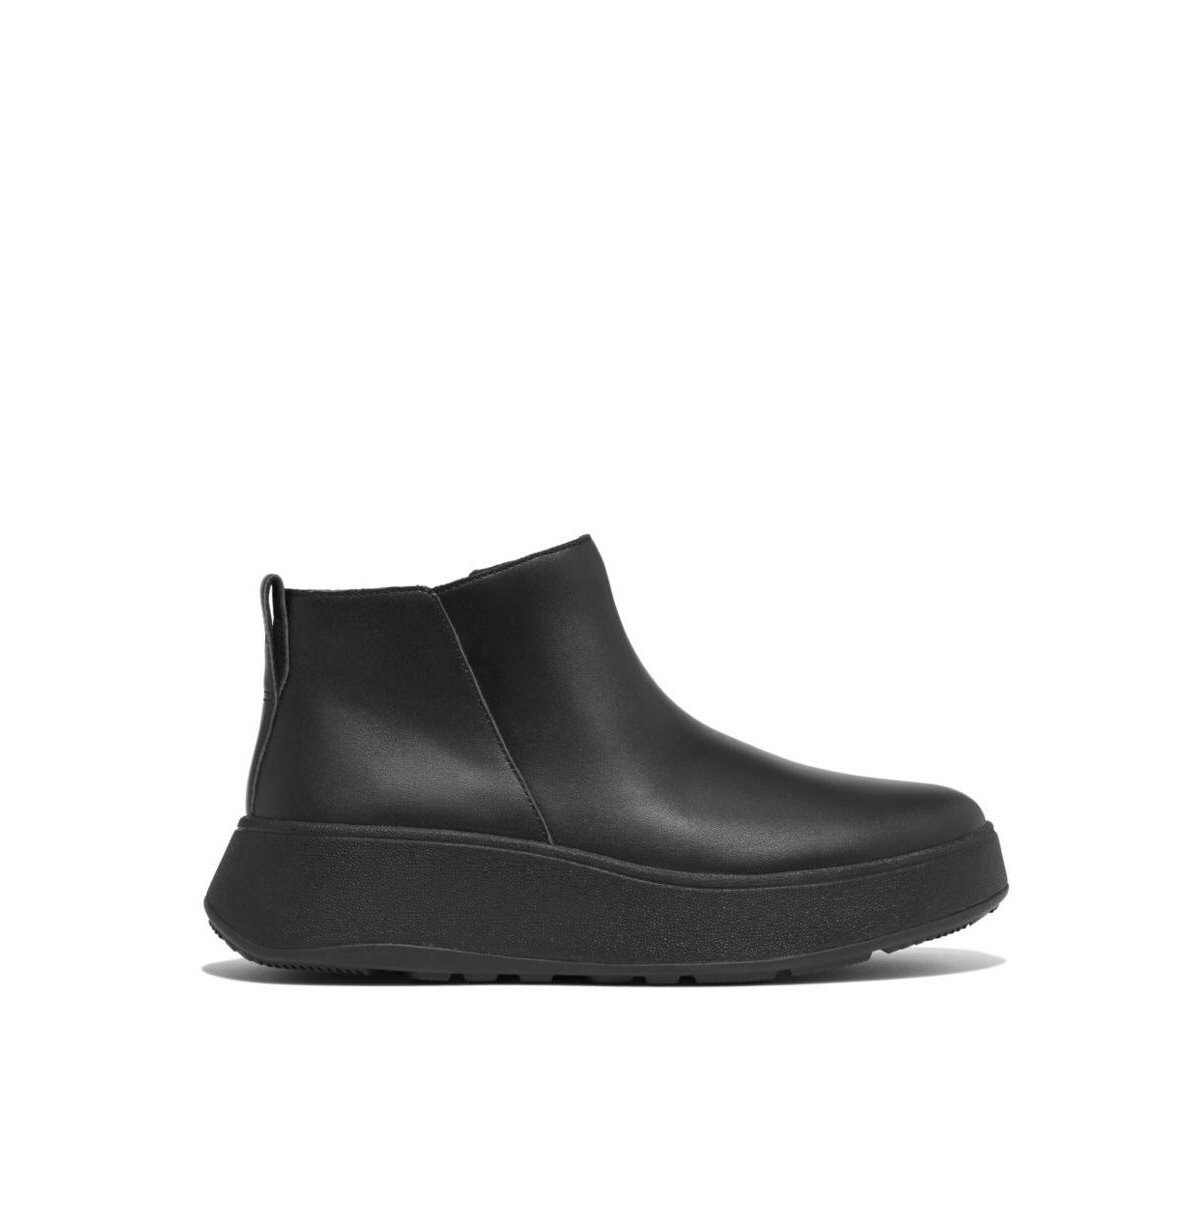 Fitflop F-Mode Water Resistant Flatform Chelsea Boots